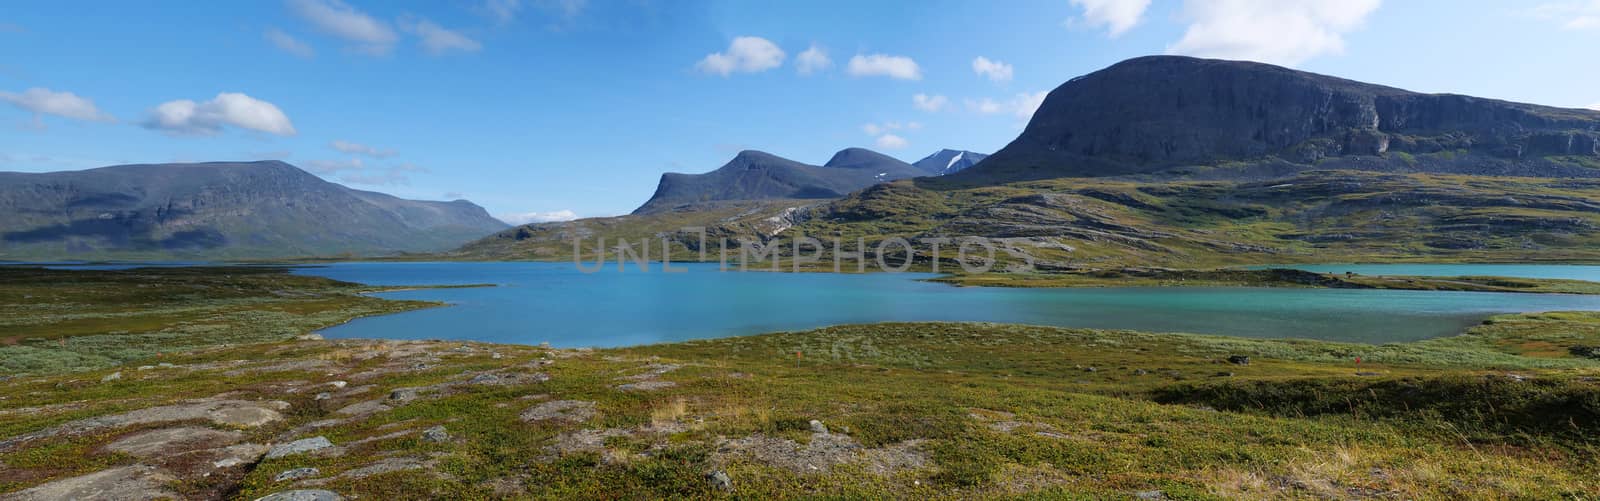 Lapland nature landscape wide panorama of blue glacial lake Allesjok near Alesjaure, birch tree forest, snow capped mountains. Northern Sweden, at Kungsleden hiking trail. Summer sunny day.